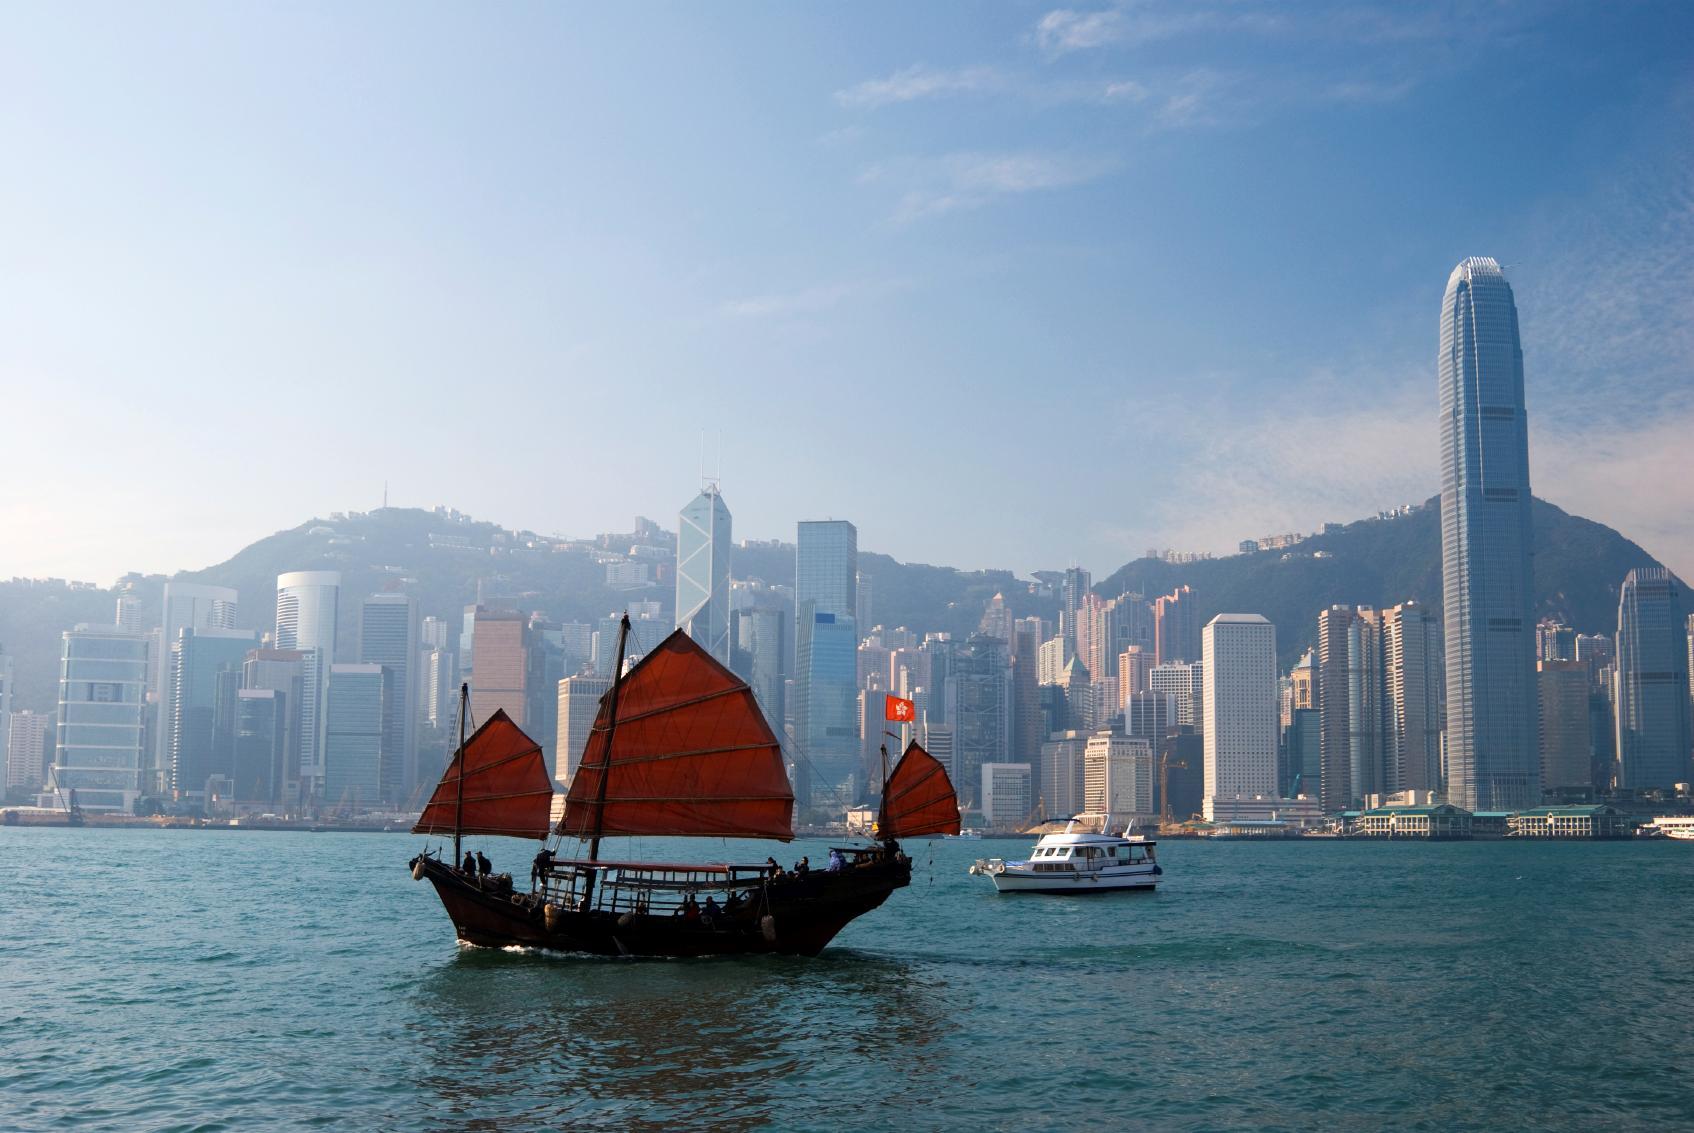 Hong Kong Latest HD Wallpaper and Picture. HD Wallapers for Free